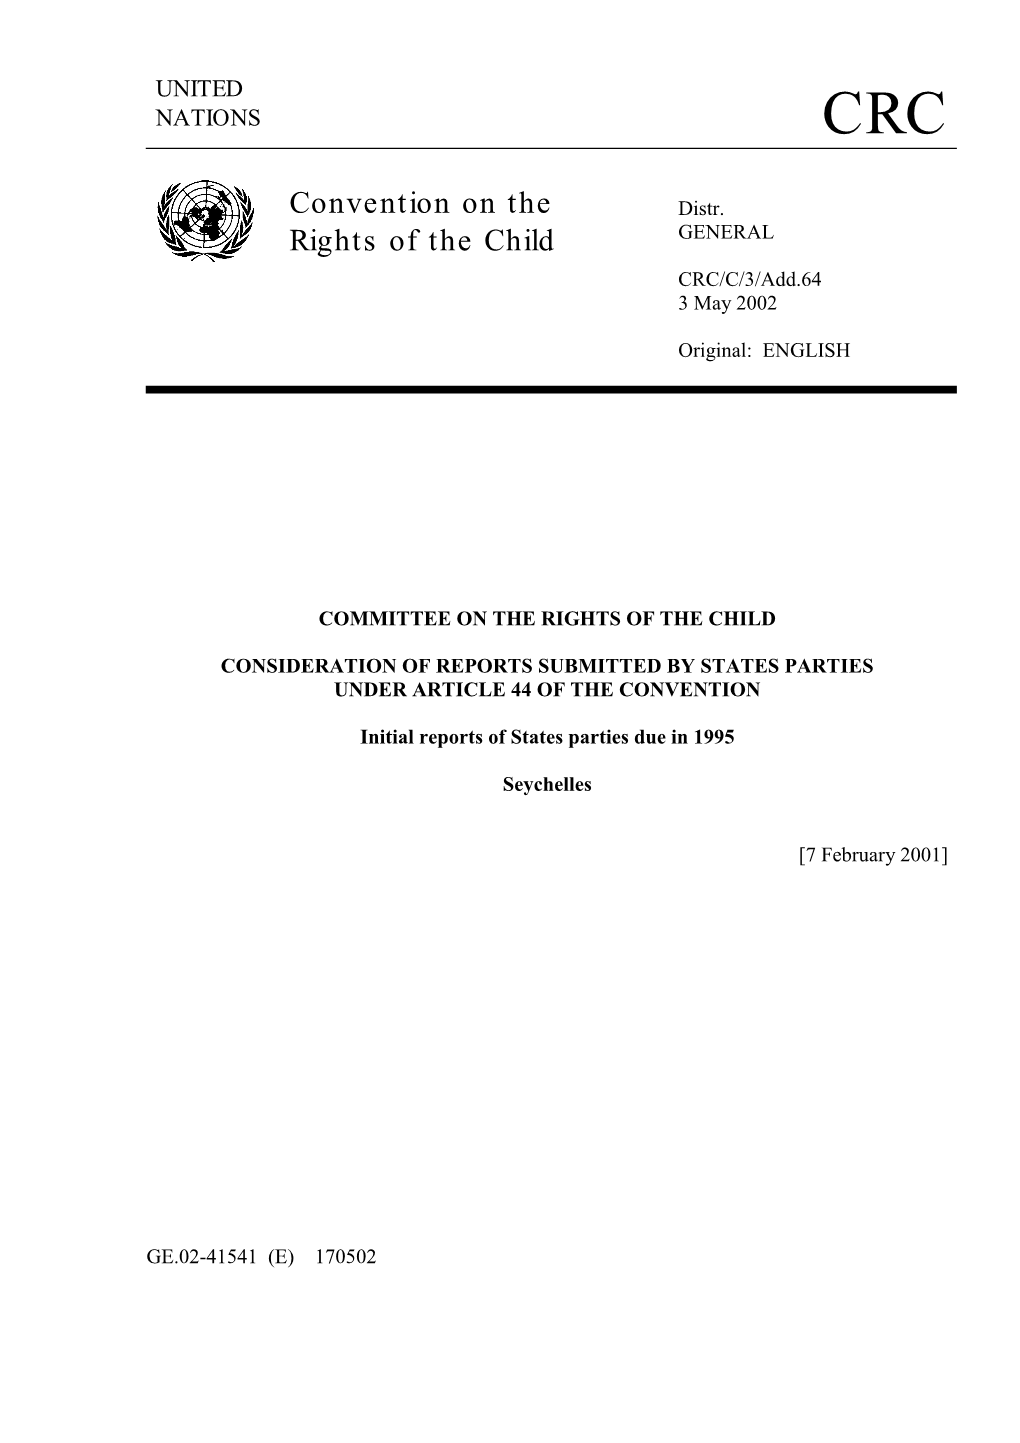 Convention on the Rights of the Child in the Republic of Seychelles from Its Ratification in 1990 up to 1995